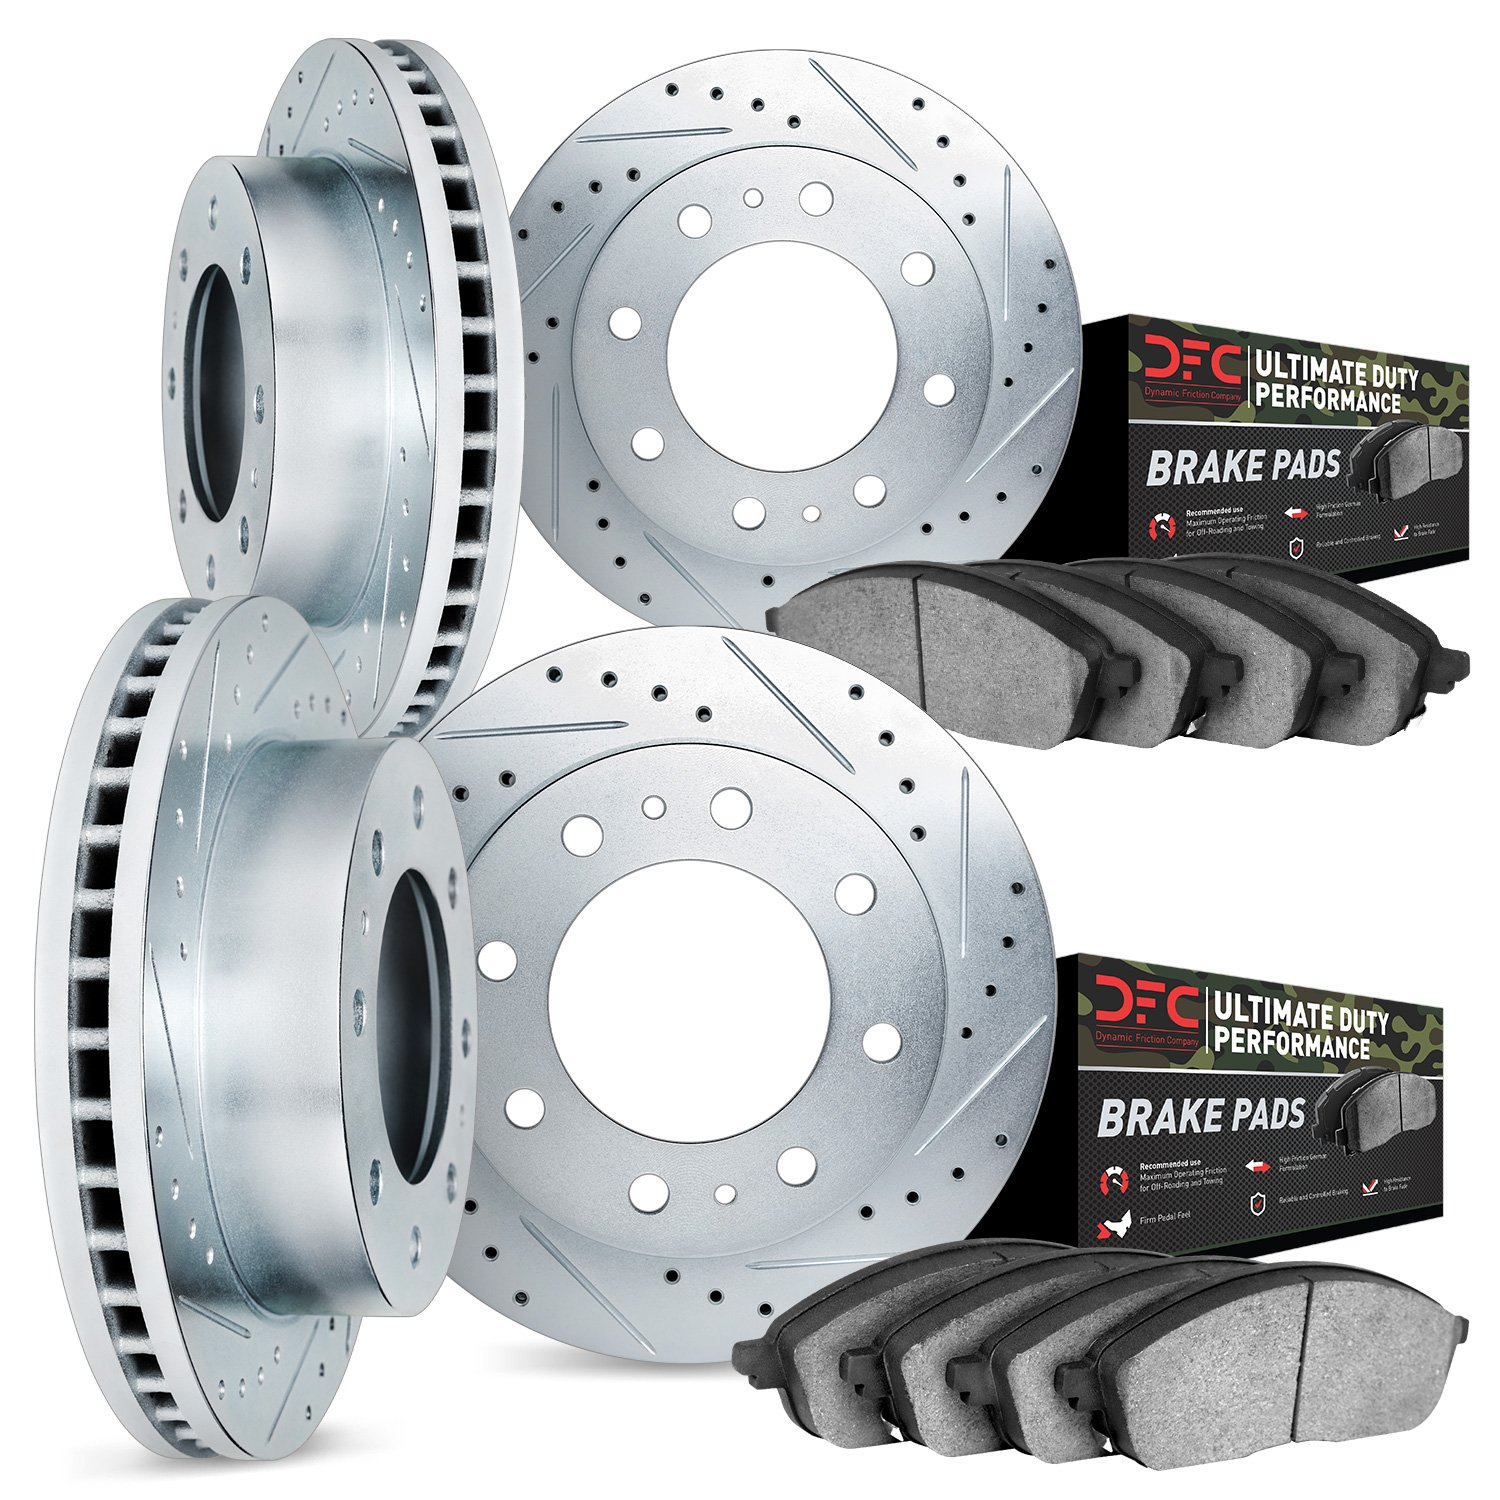 7404-54019 Drilled/Slotted Brake Rotors with Ultimate-Duty Brake Pads Kit [Silver], 2003-2004 Ford/Lincoln/Mercury/Mazda, Positi